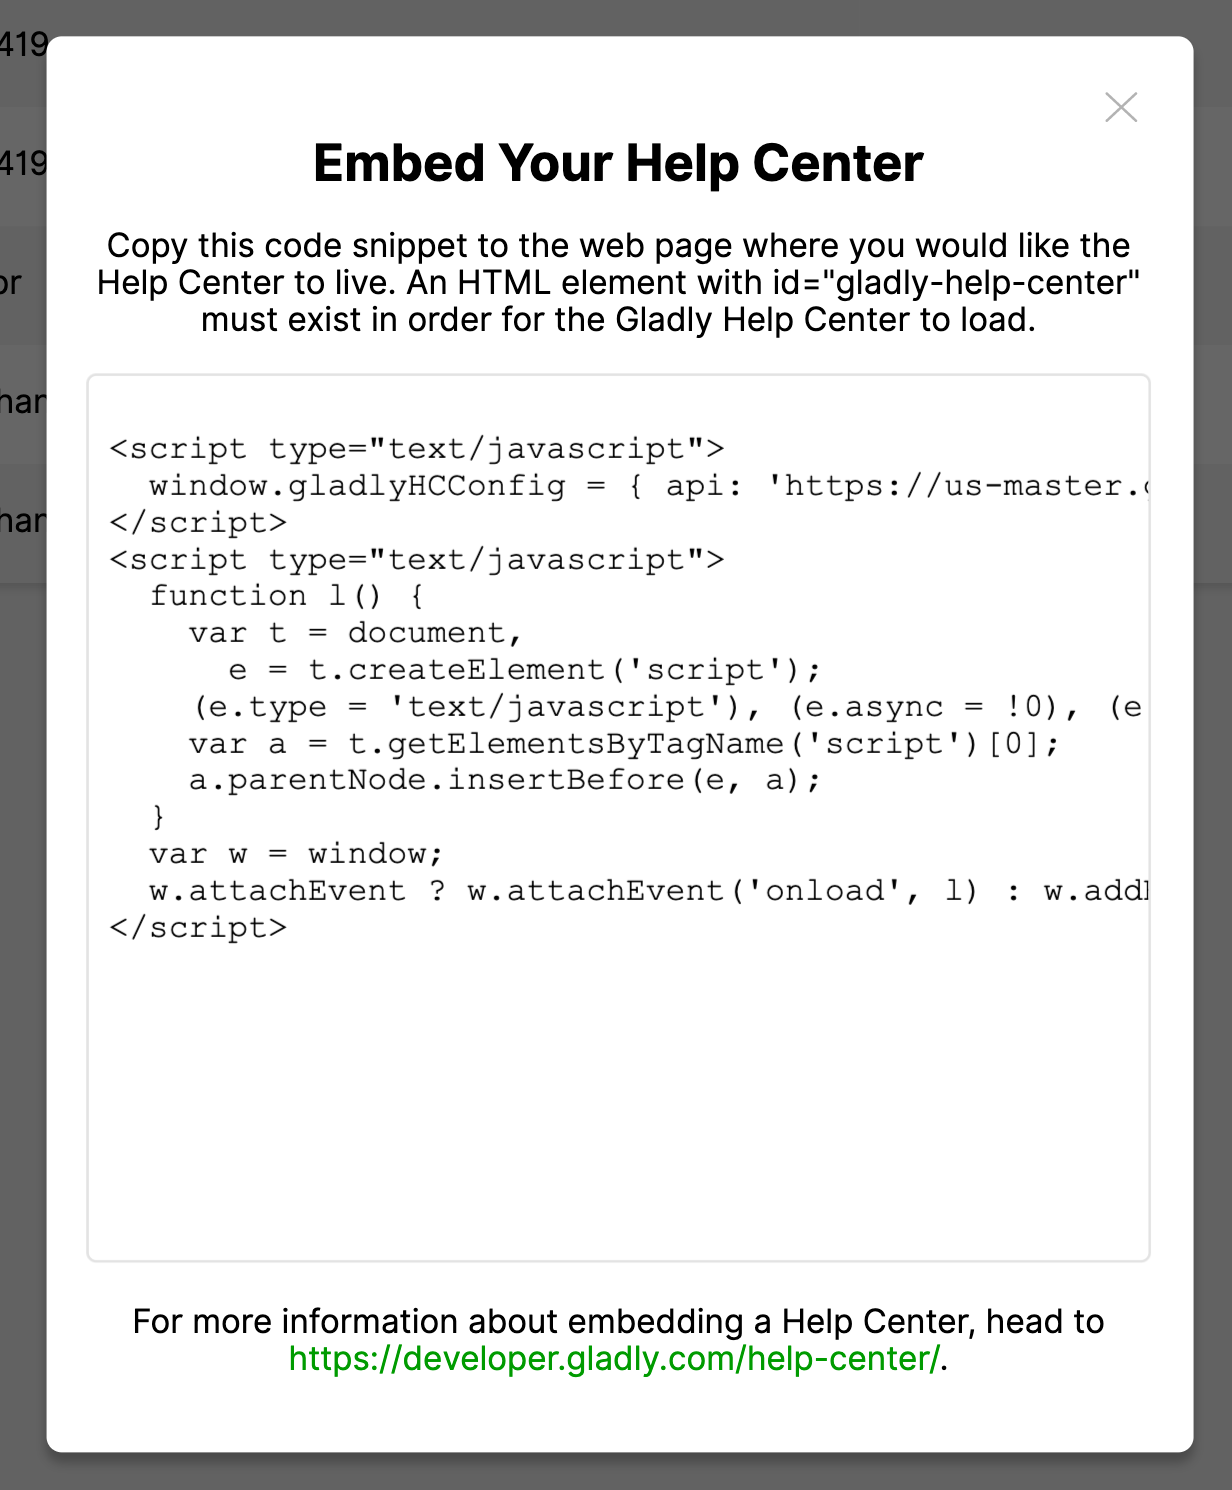 embed the help center code